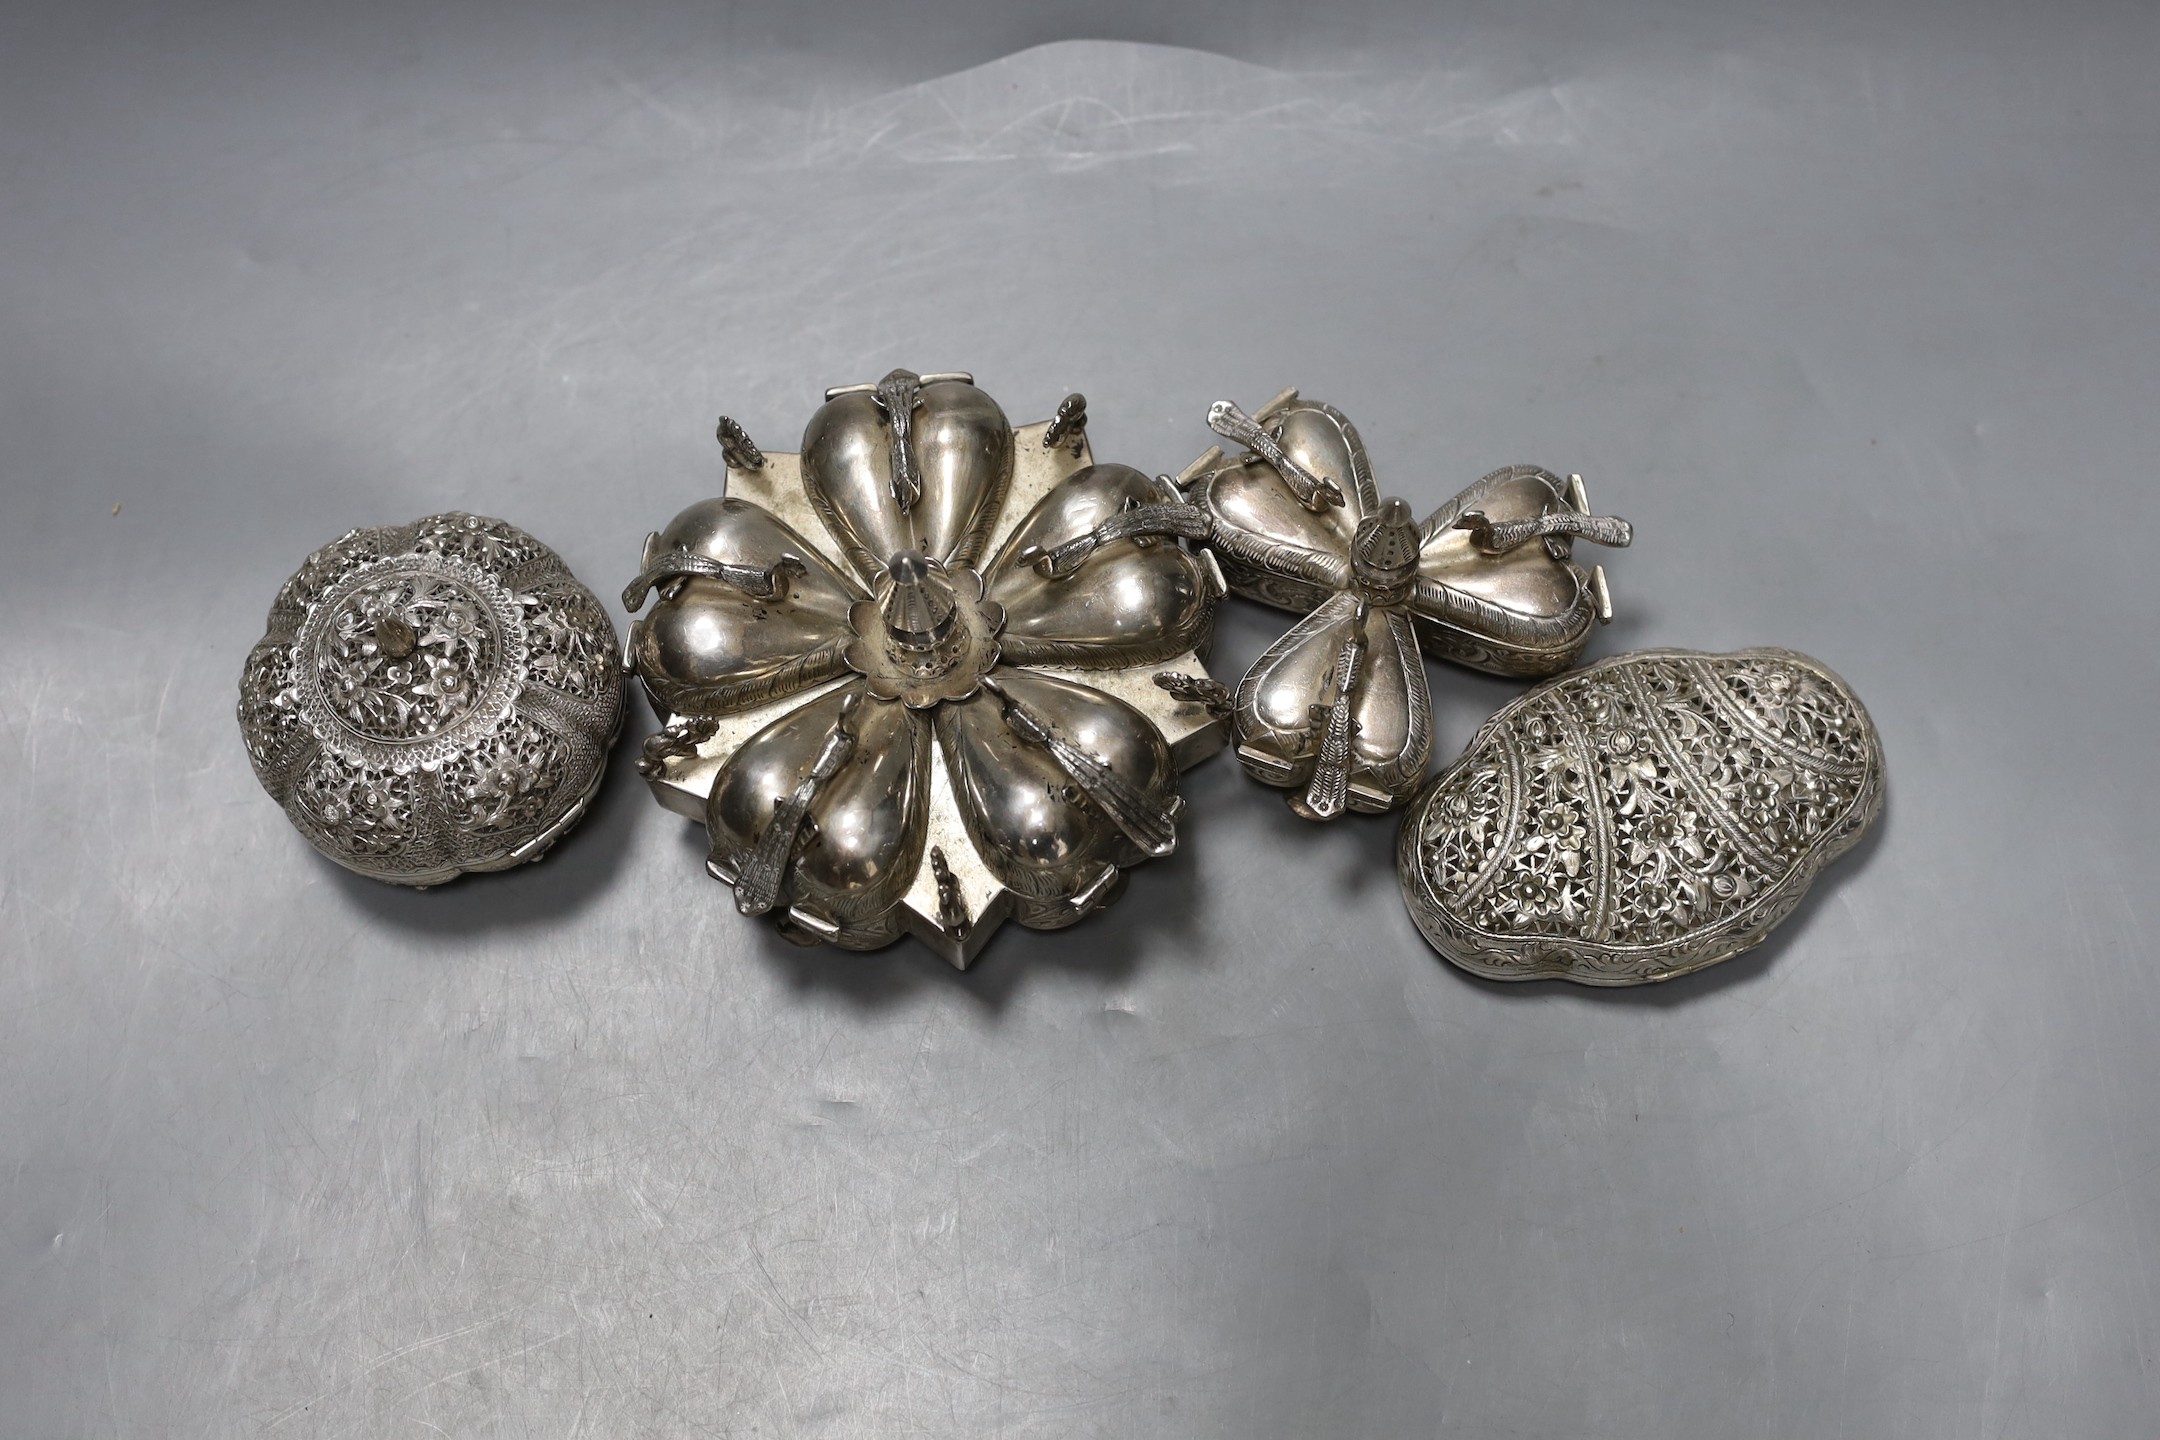 Two 20th century Indian white metal segmental spice boxes, decorated with peacocks, largest 13.5cm and two similar pierced scent boxes with covers.